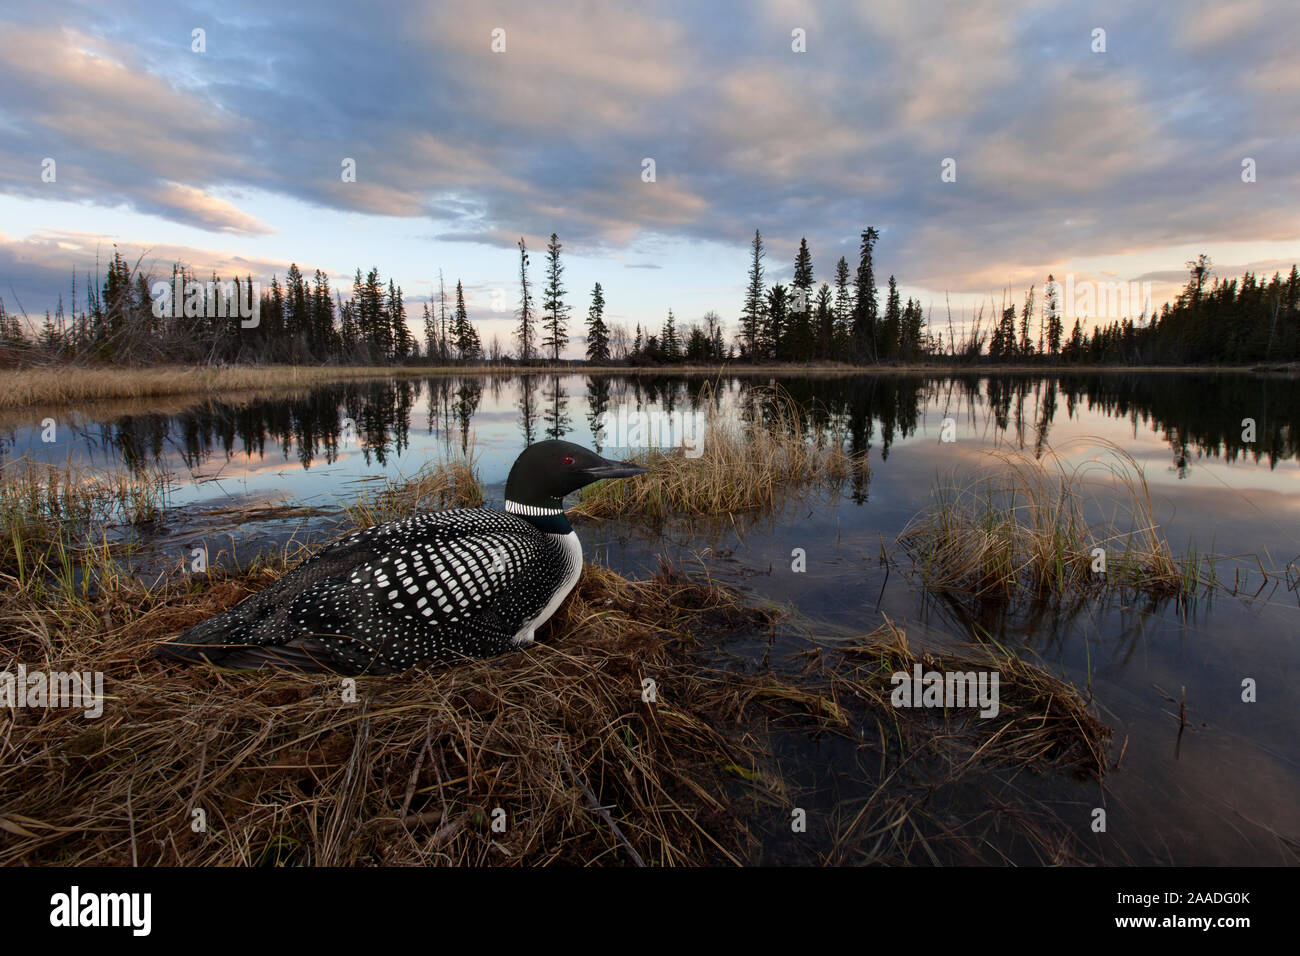 Common loon (Gavia immer) sits on her nest at sunset in the Cariboo region of British Columbia, Canada, taken with remote, May Stock Photo